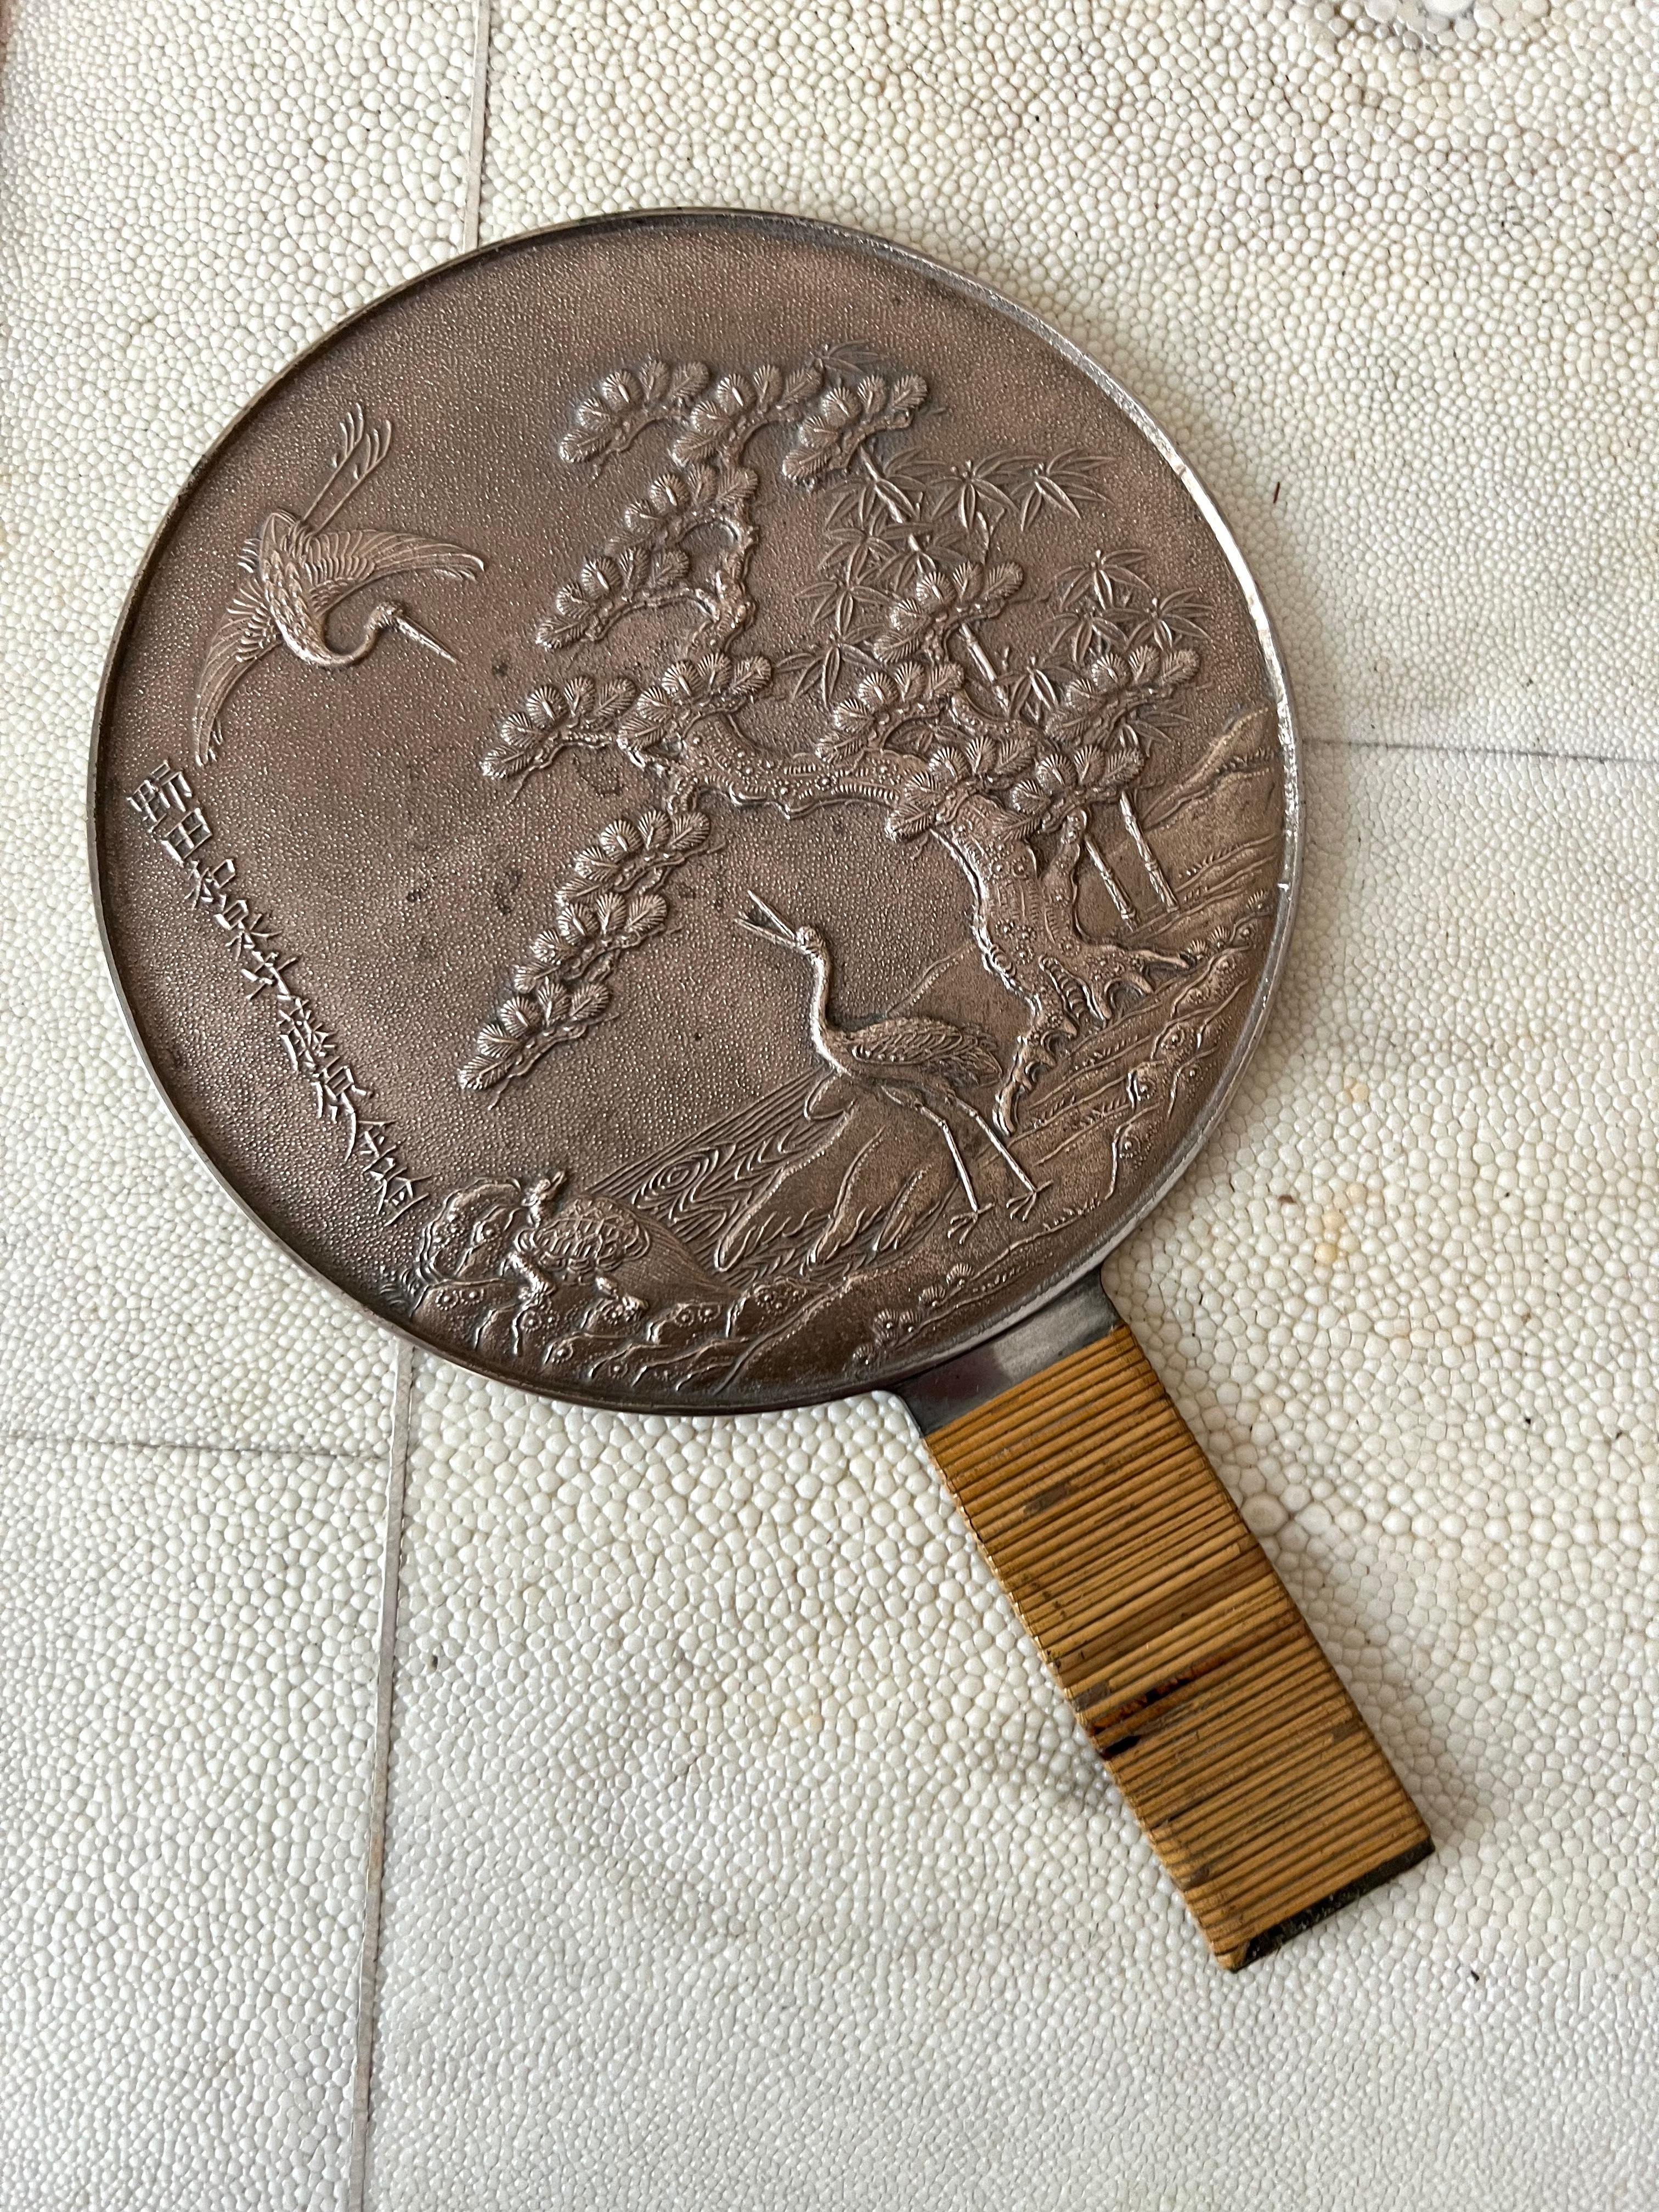 Japanese Bronze Hand Mirror with Lacquer Box In Good Condition For Sale In Los Angeles, CA